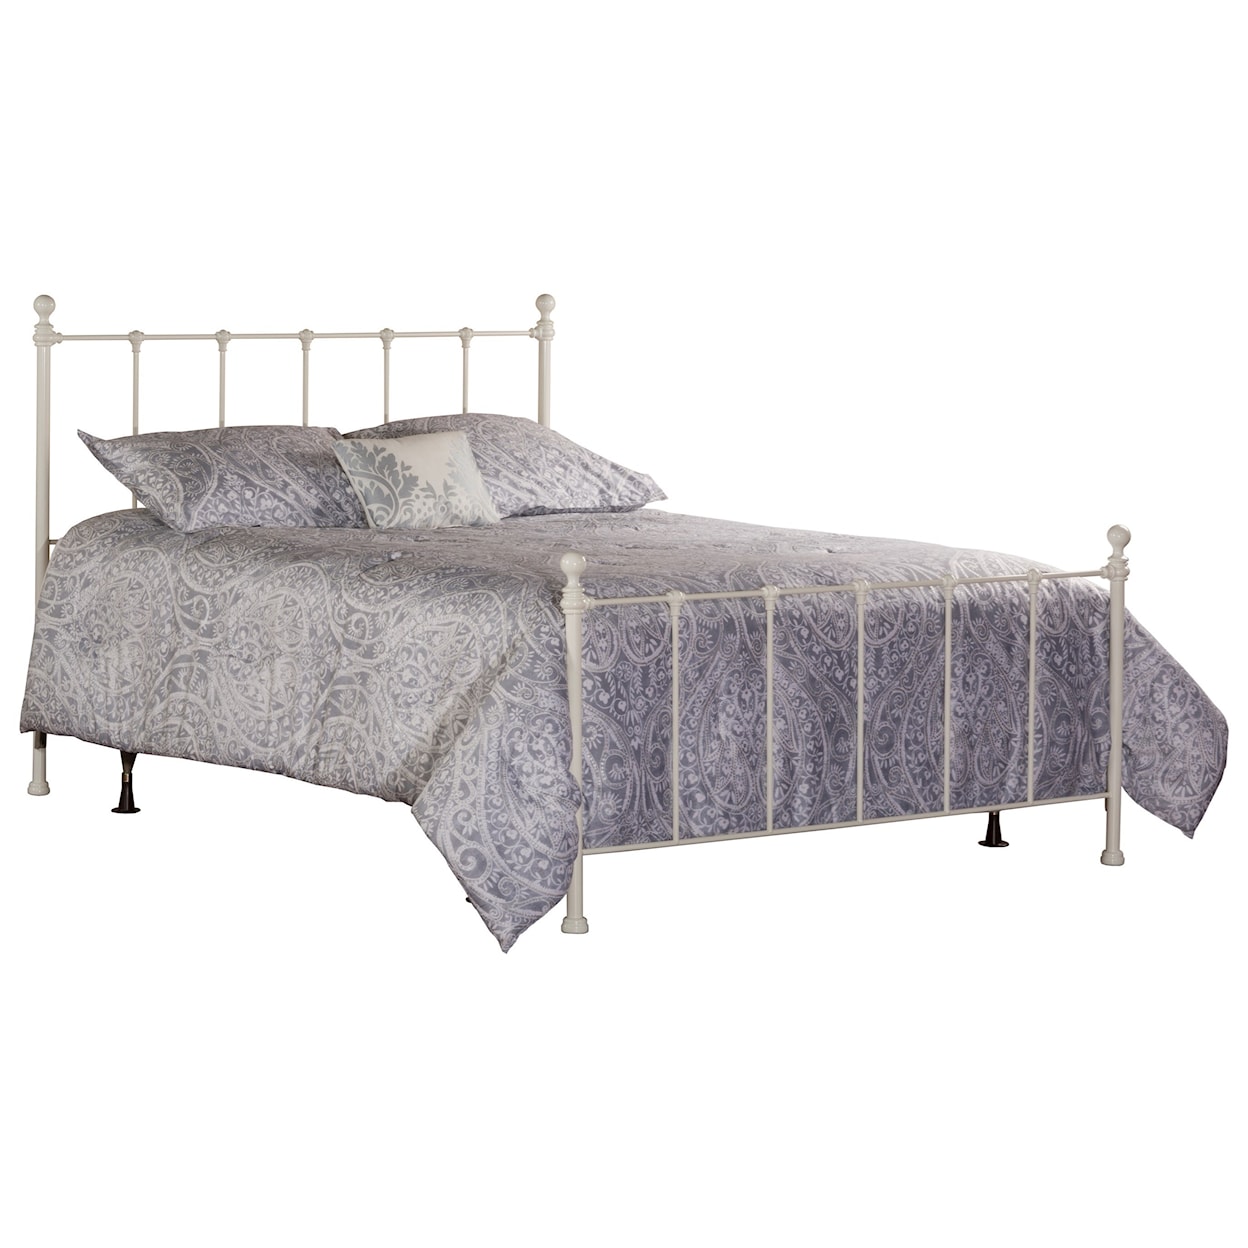 Hillsdale Metal Beds Twin Molly Bed Set